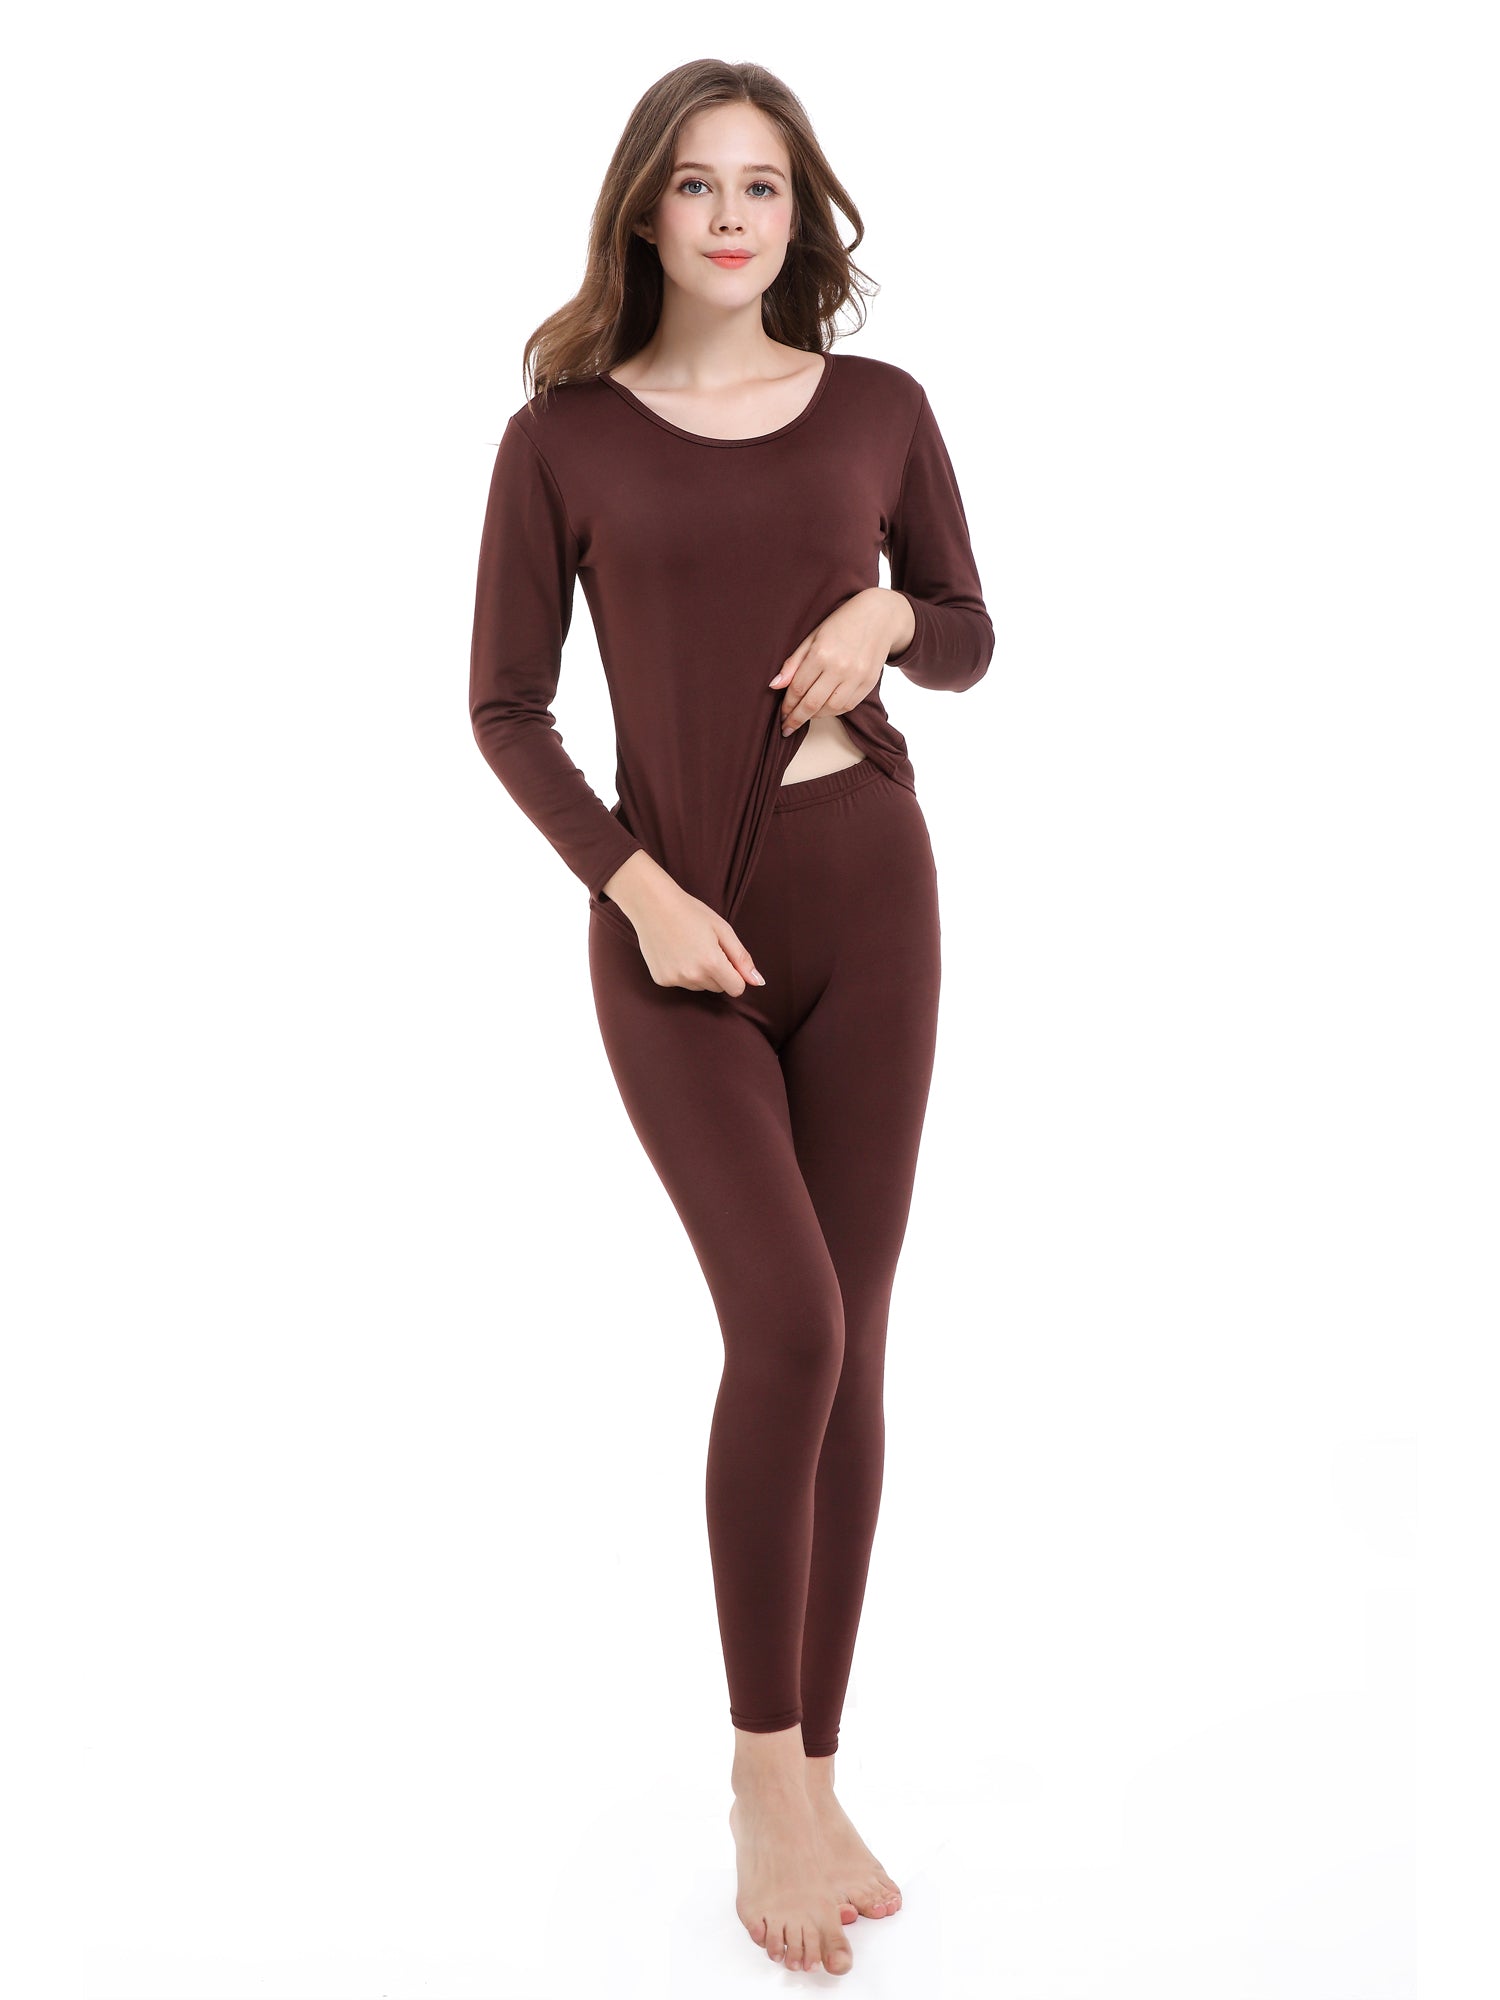  Thermal Underwear For Women Long Johns Set Fleece Lined  Ultra Soft Brown Small